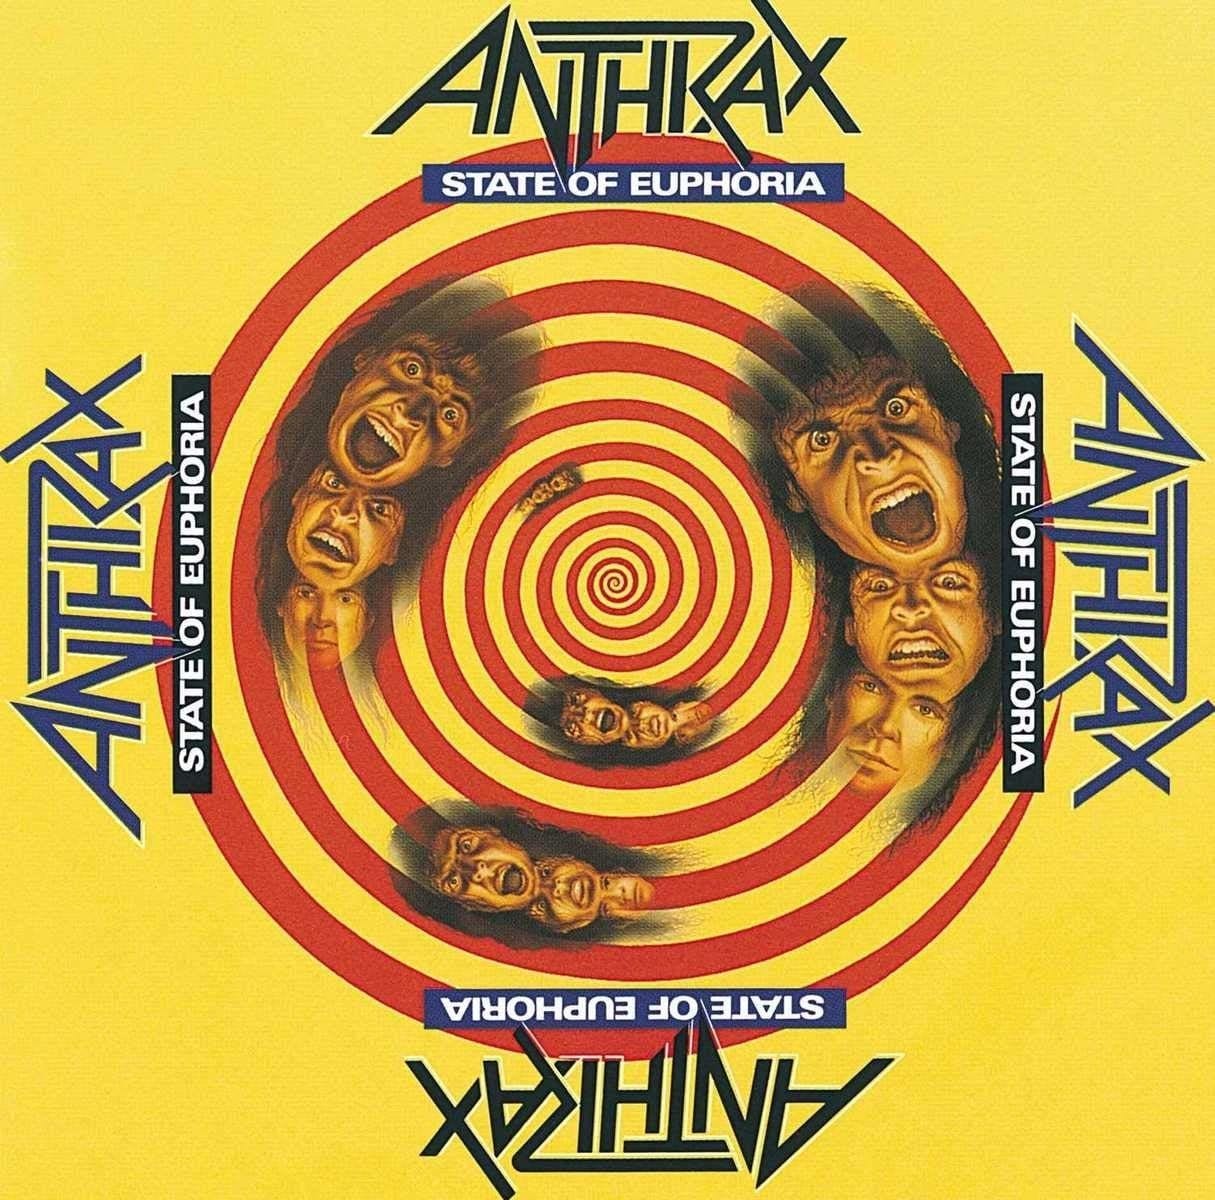 On the 30th Anniversary of Anthrax’s ‘State of Euphoria’